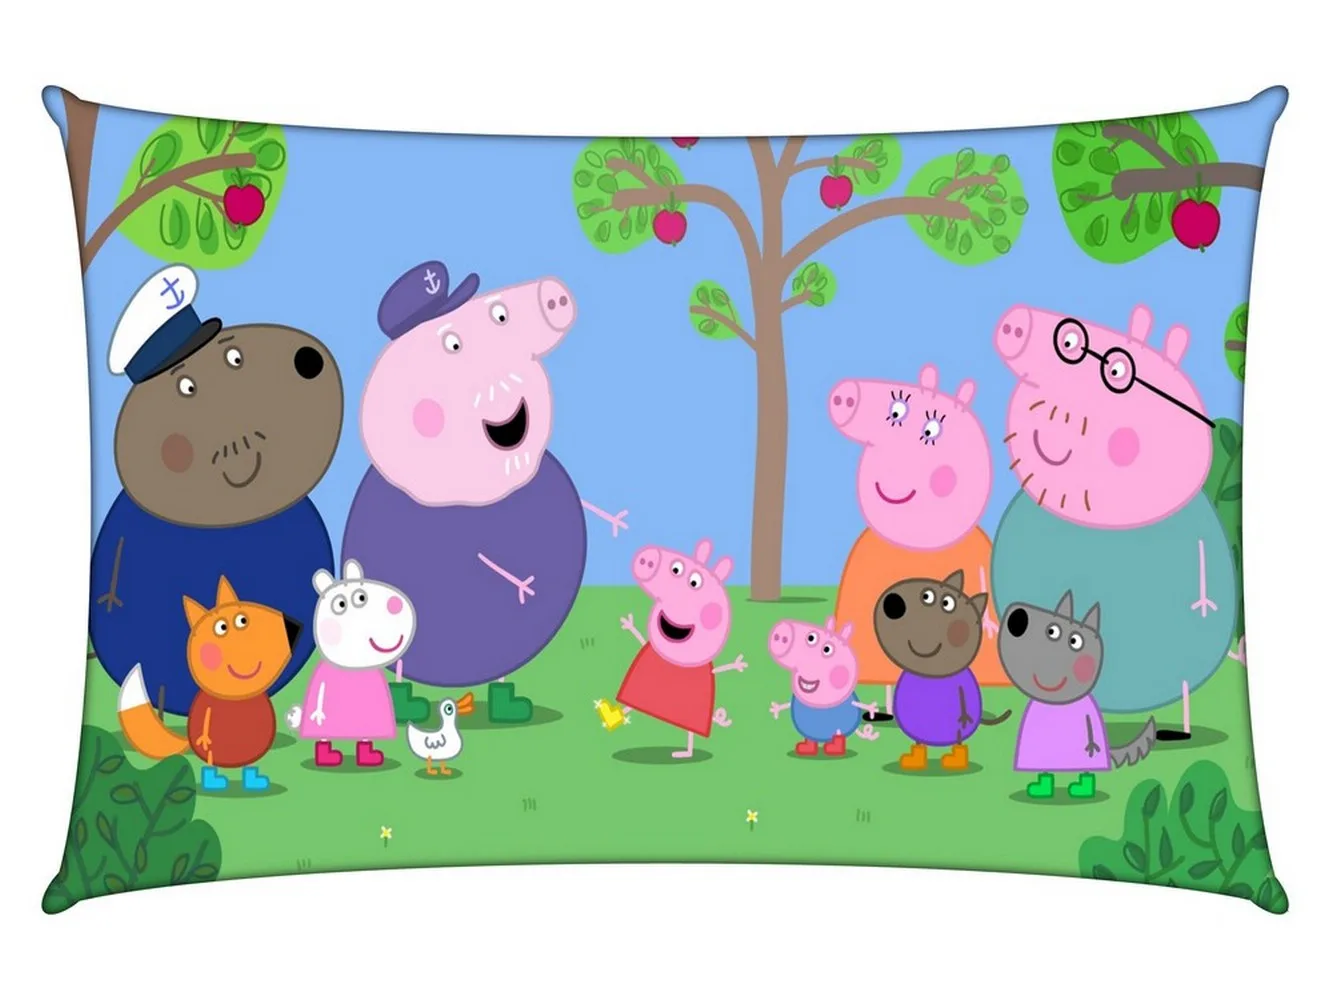 Pig family Kids cartoon pillow cover, Blue, 18x12 Inches, Pack of 1